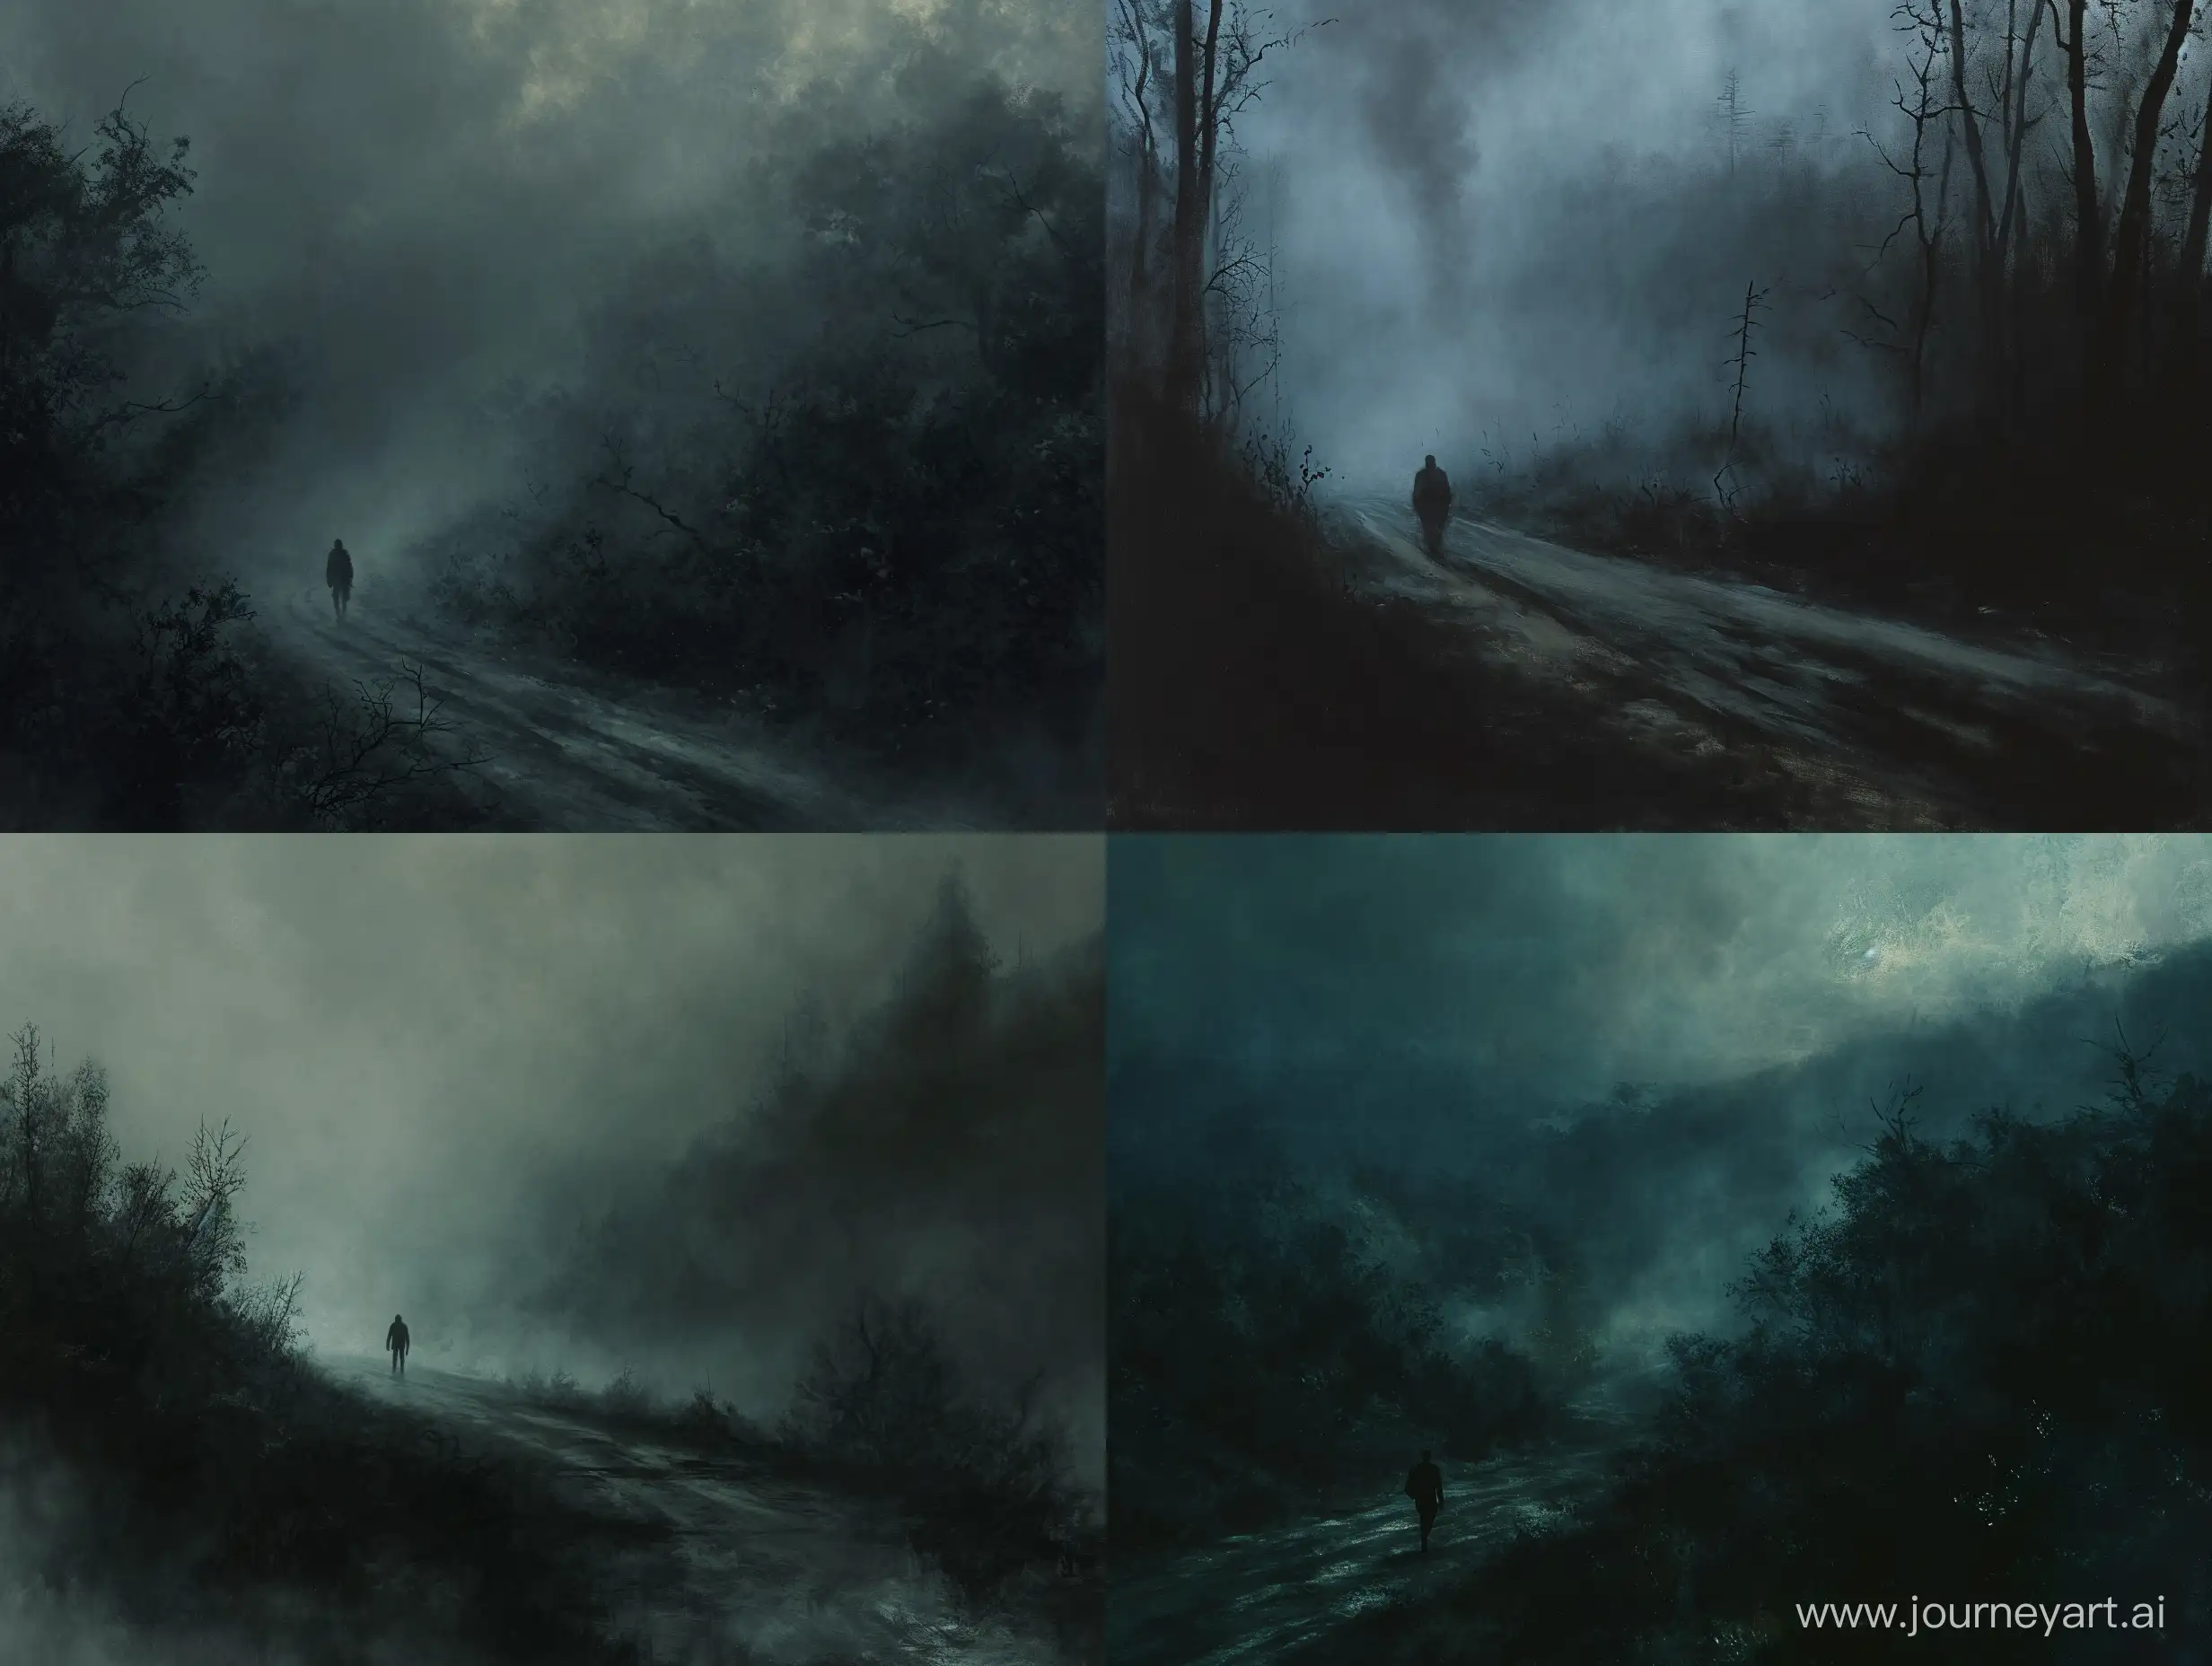 The realistic painting depicts a man walking along a dark road into a dark forest. There is fog all around him, and very little vegetation. All the shades in the painting are dark. The image has a 3:2 aspect ratio, and the man is closer to the viewer in it.